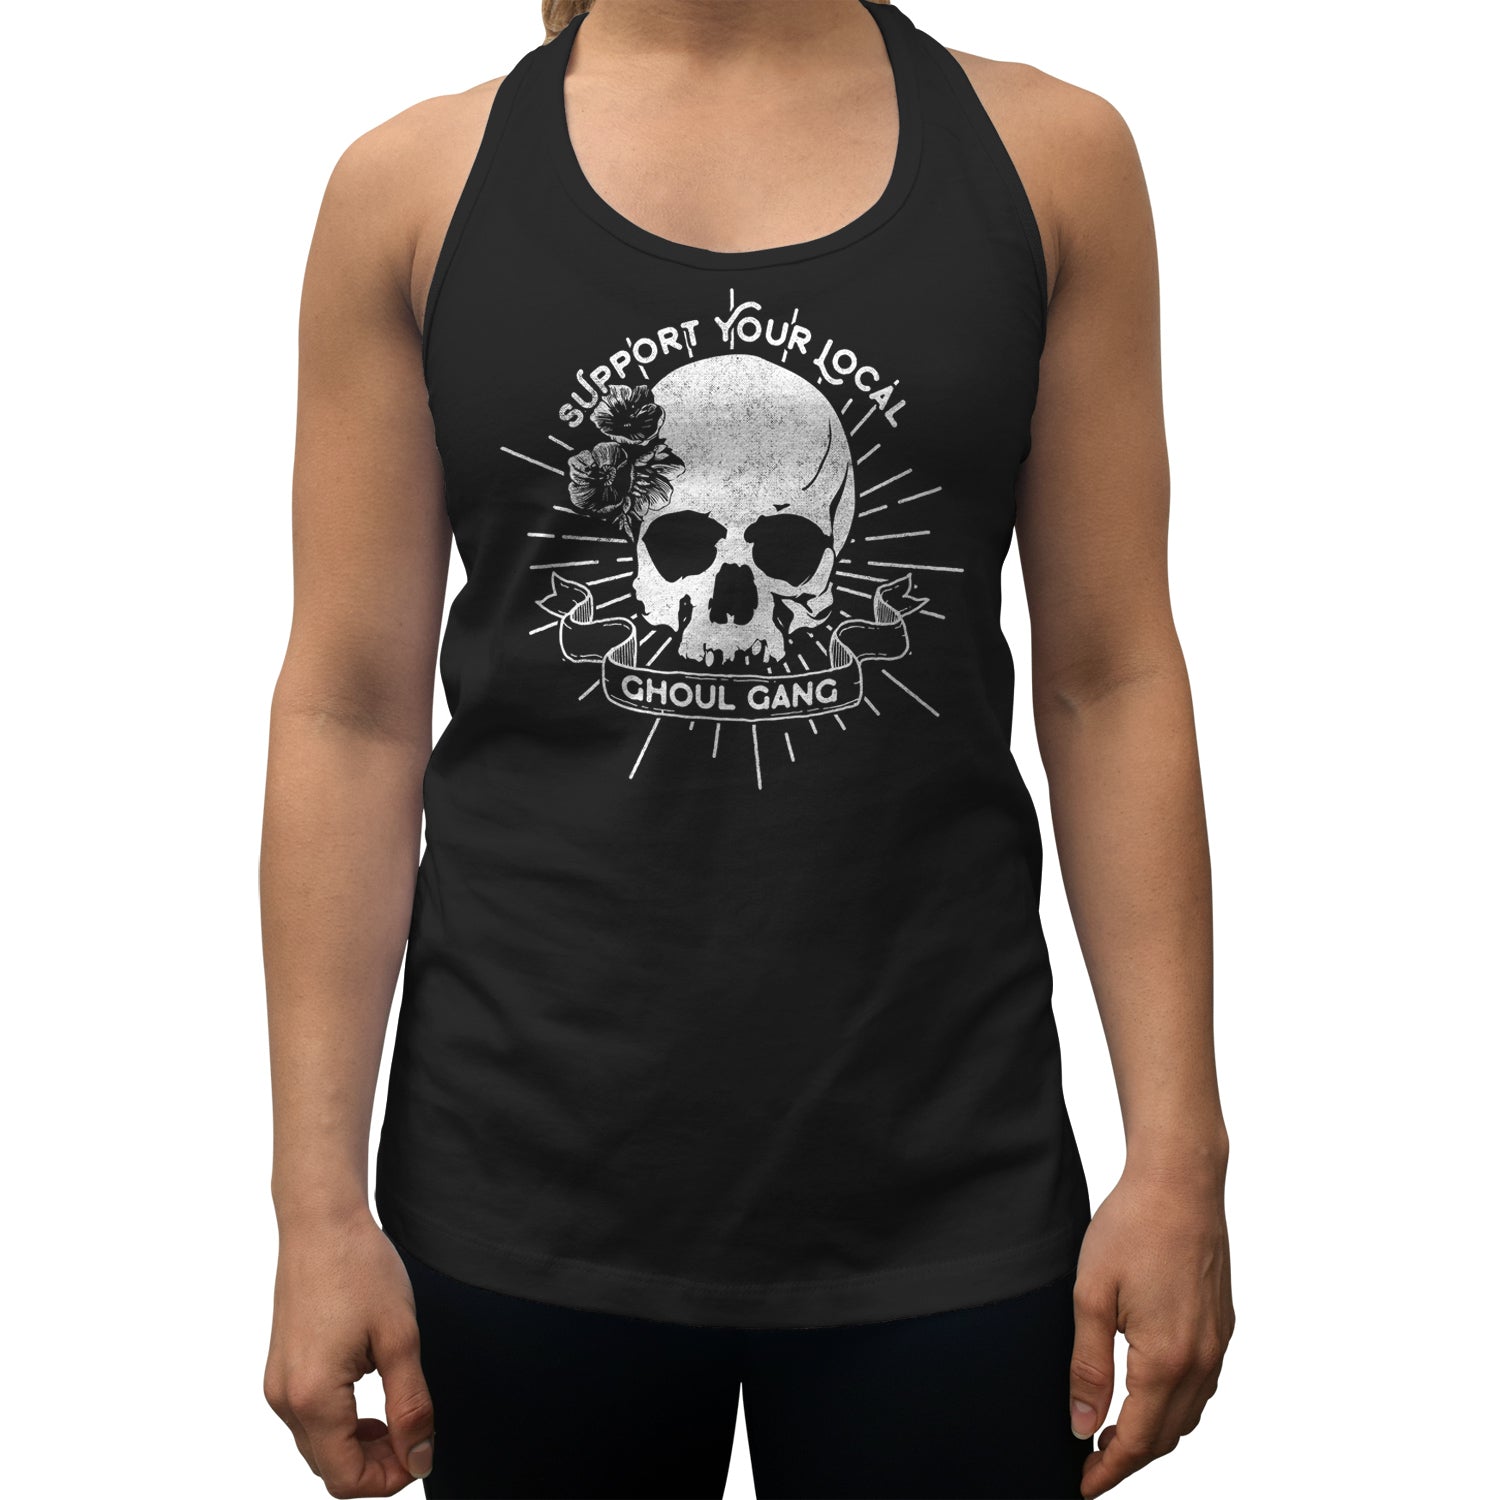 Women's Support Your Local Ghoul Gang Racerback Tank Top